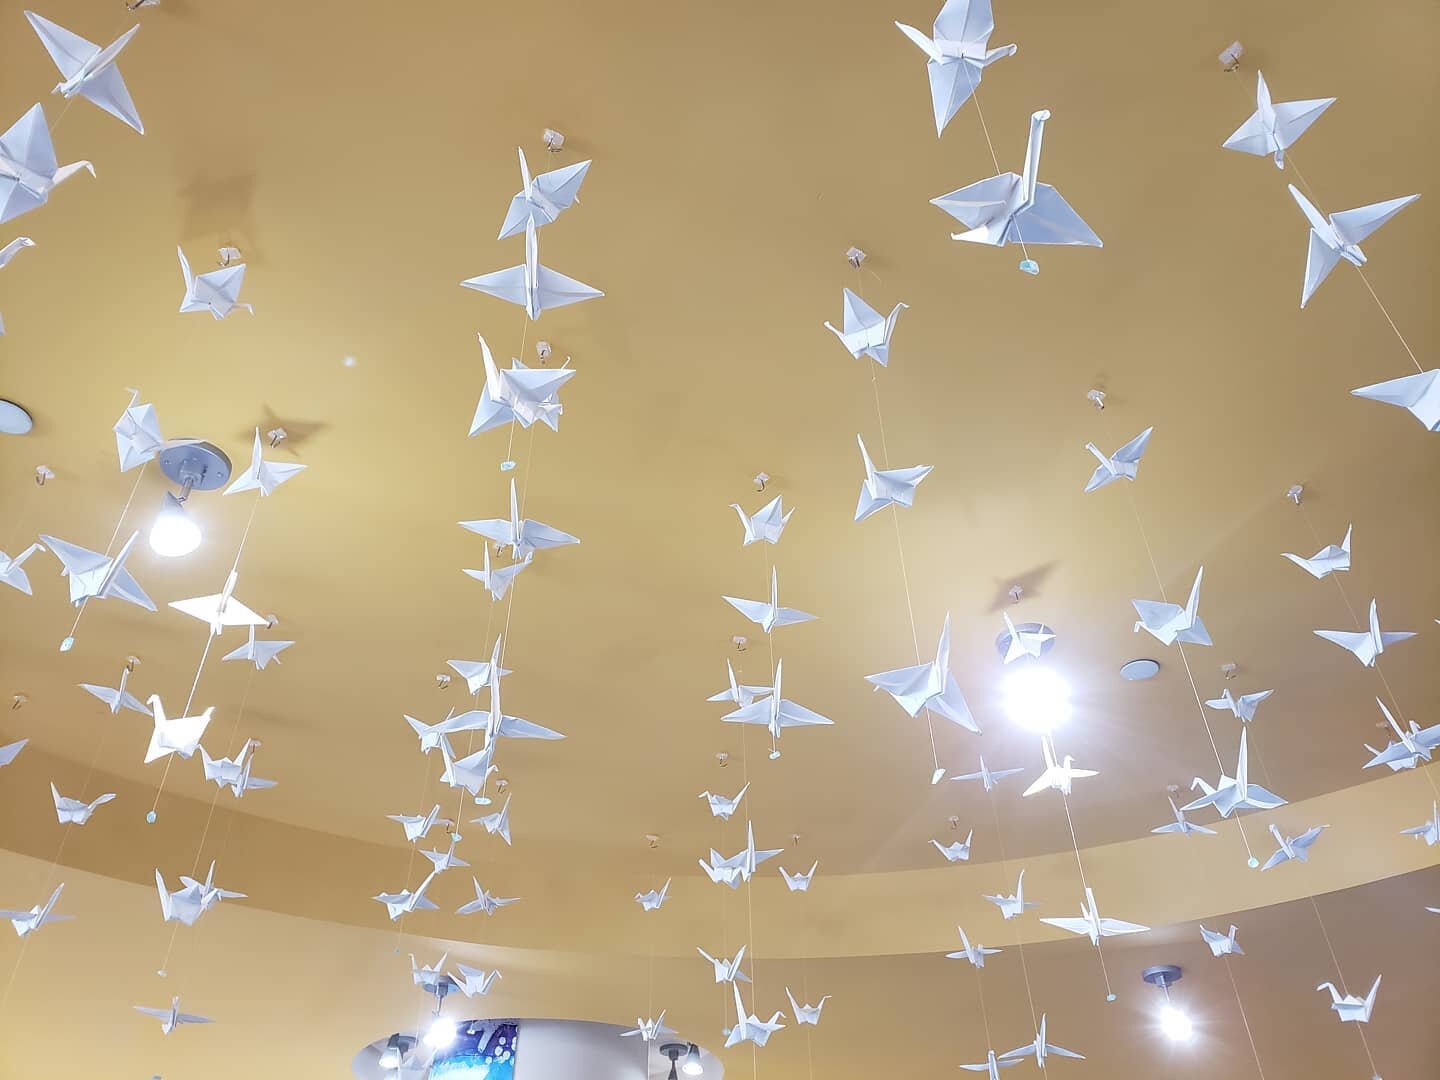 &quot;Fly Free, My Friends. Miss You.&quot; -Montefiore Perioperative Department Nurse

A mini crane exhibition is hanging as a part of the Children's Hospital at Montefiore Healing Garden. Each crane contains a 6 word poem written by an employee or 